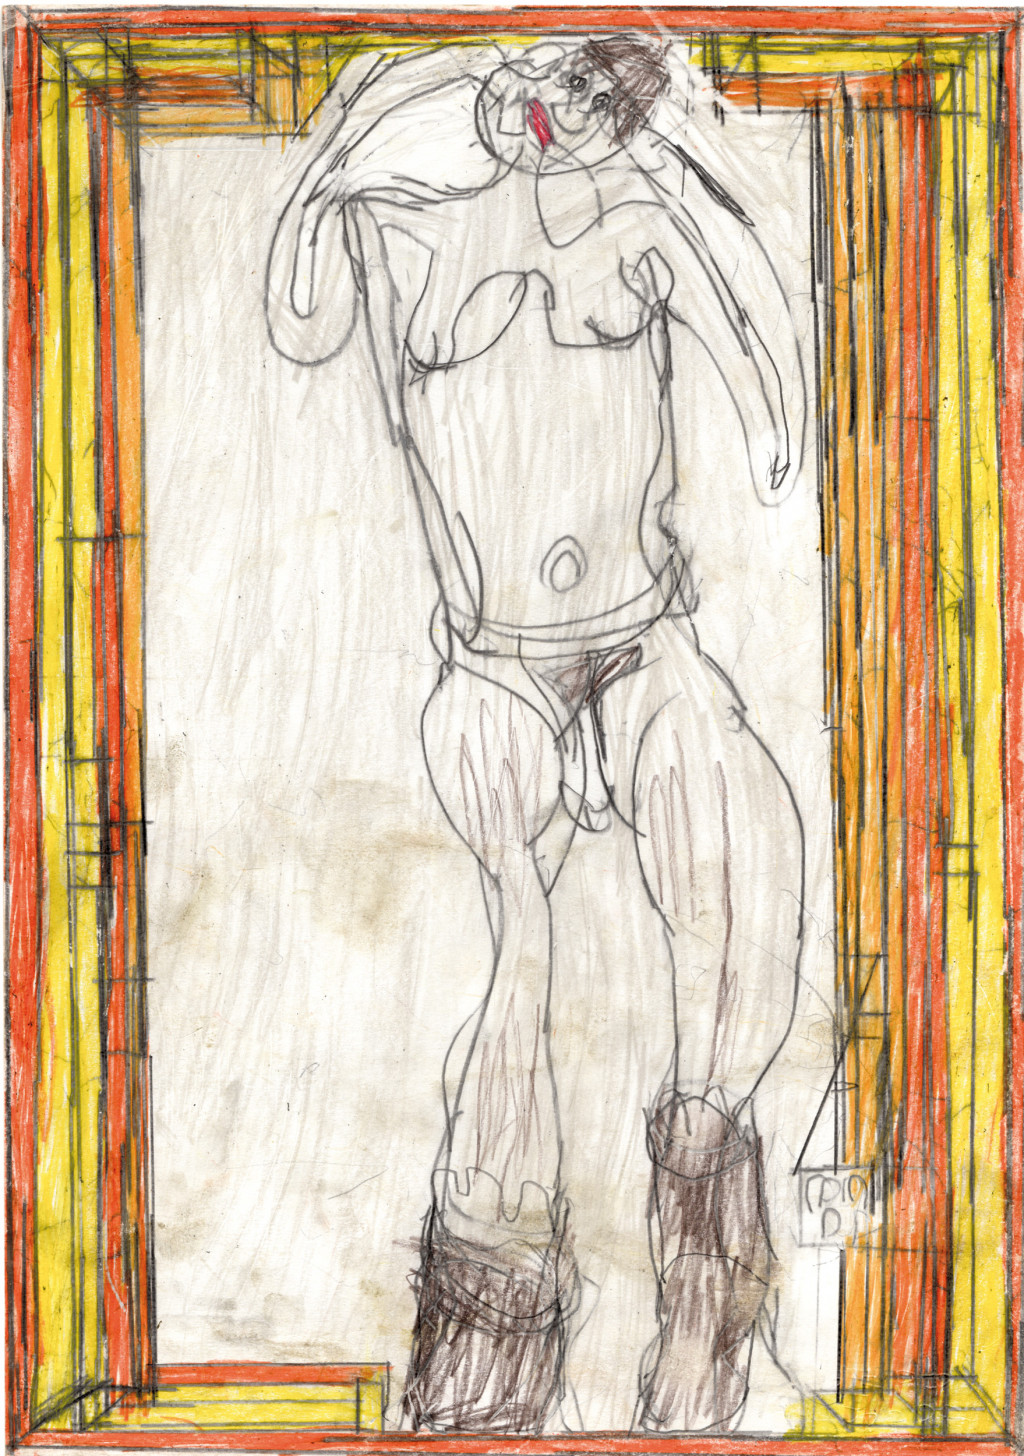 Josef Hofer, *untitled*, 2008. coloured pencil and graphite on paper, 16.54 x 11.65 in - © christian berst — art brut